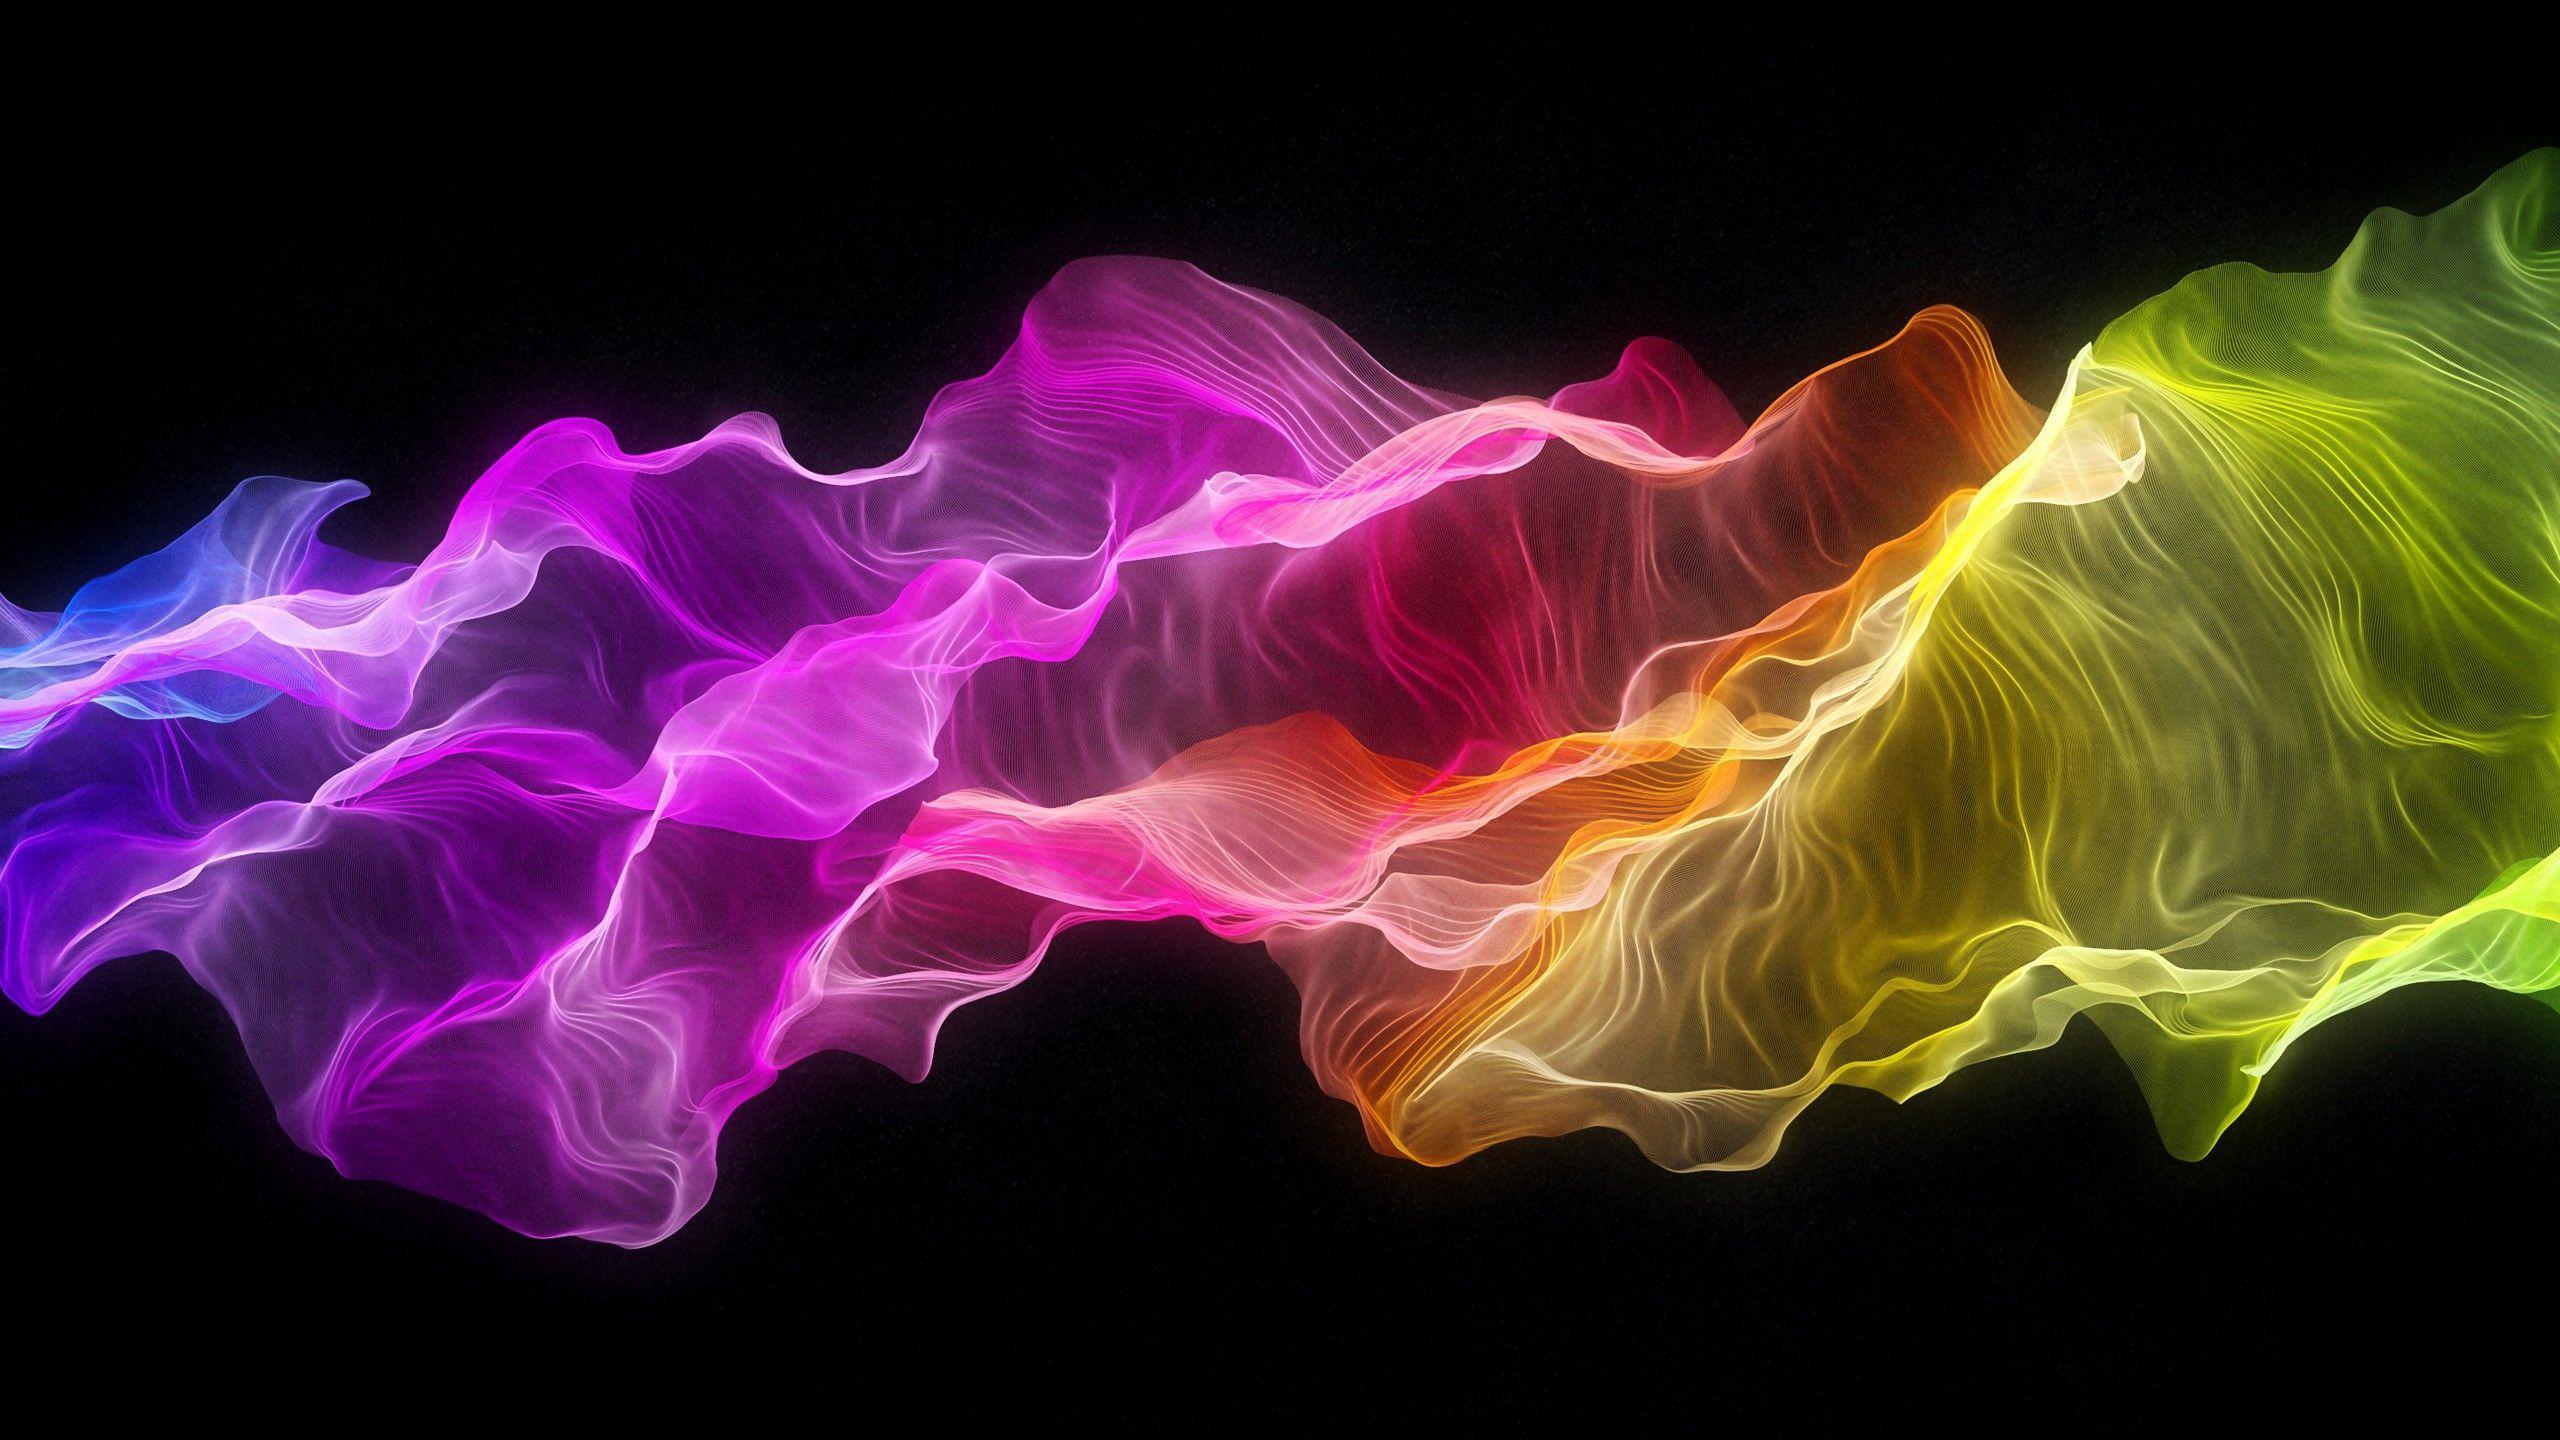 Colorful Flame widescreen wallpaper. Wide